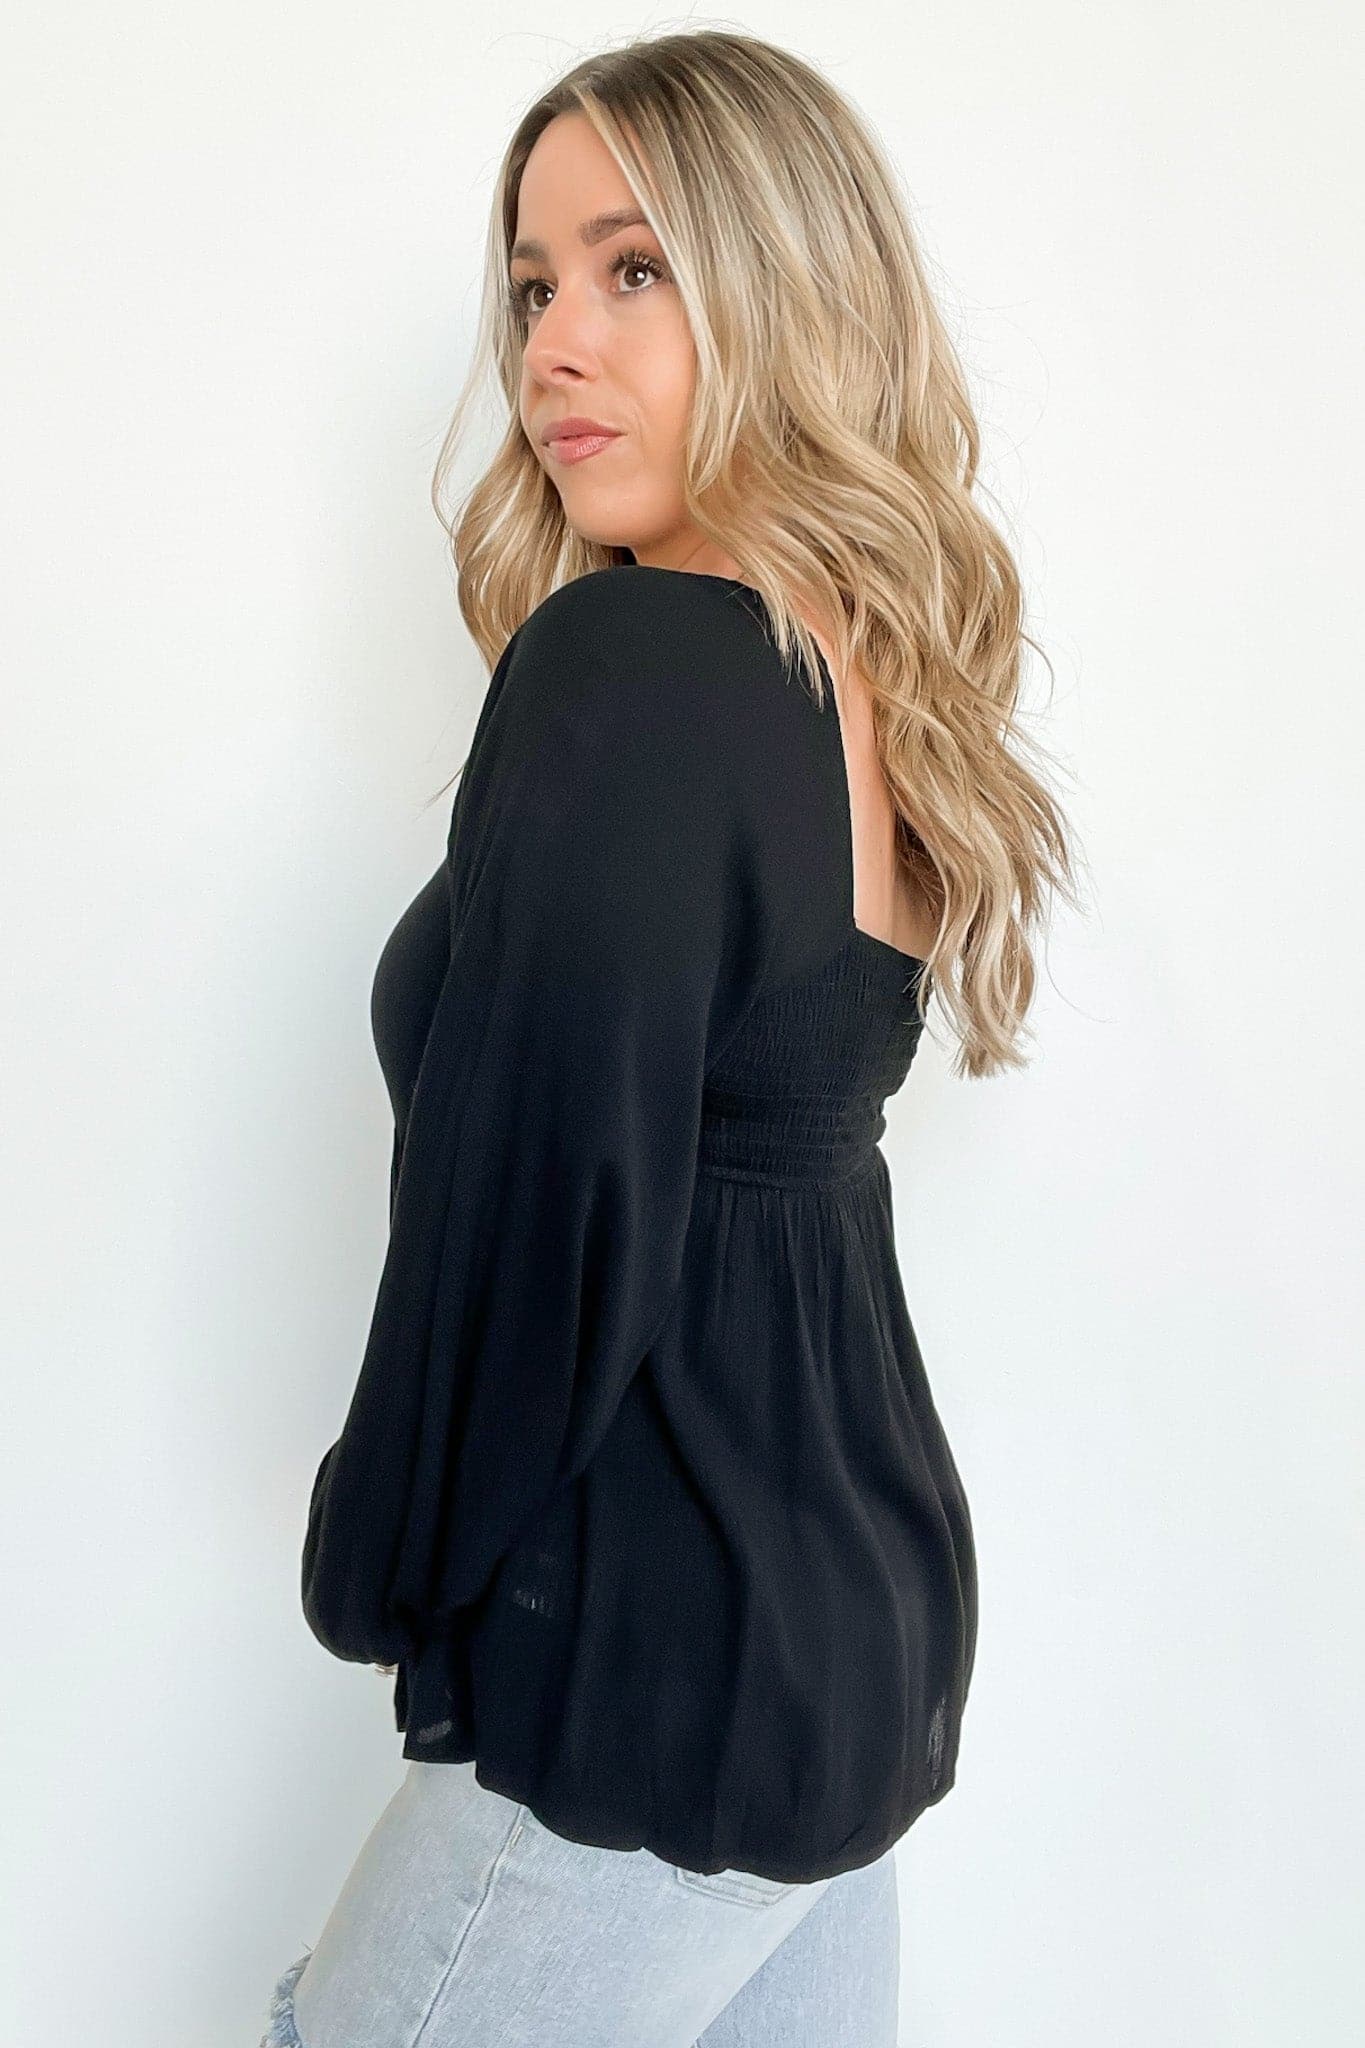  Luannie Flowy Peasant Top - BACK IN STOCK - Madison and Mallory